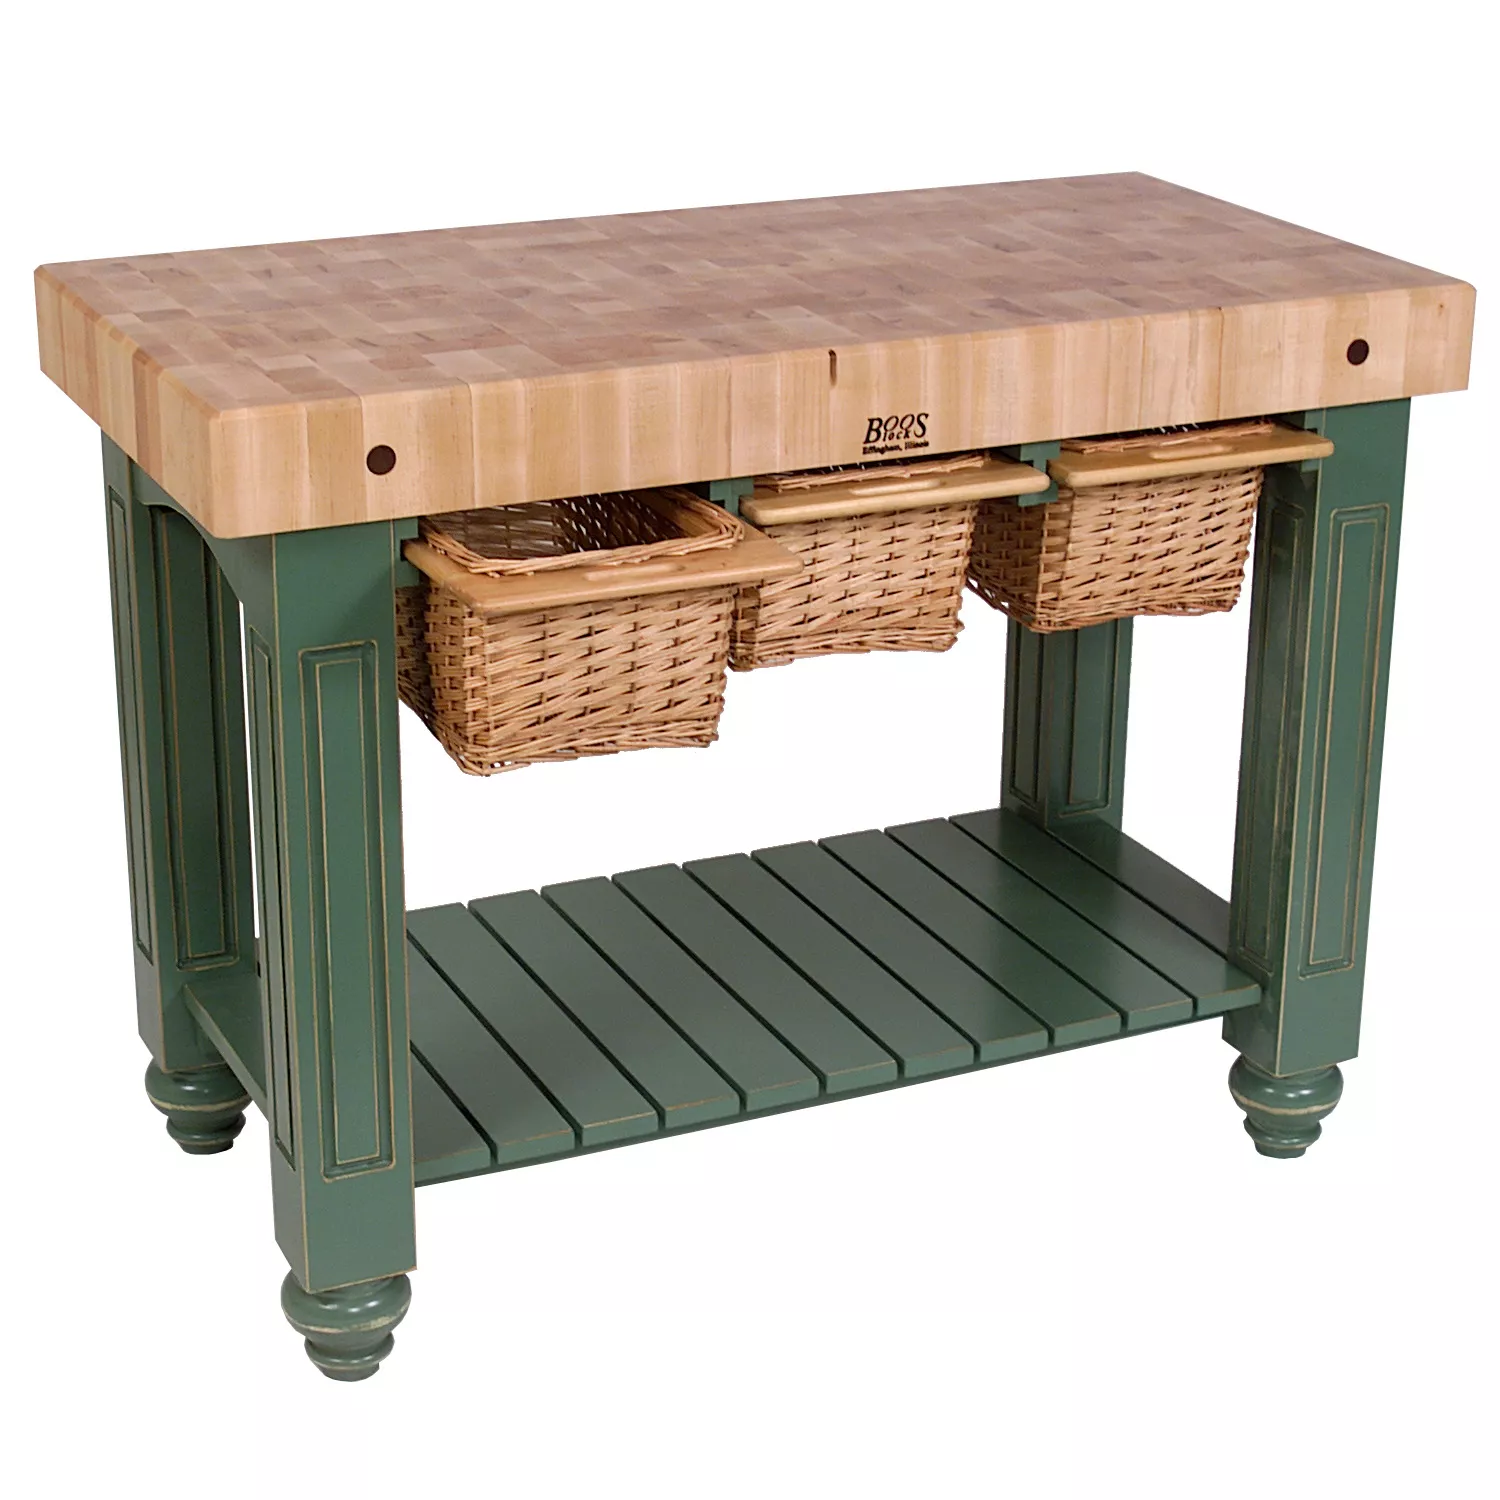 John Boos Maple End Grain 4" Thick Gathering Butcher Block Table with 3 Baskets, 48"x24"x36"